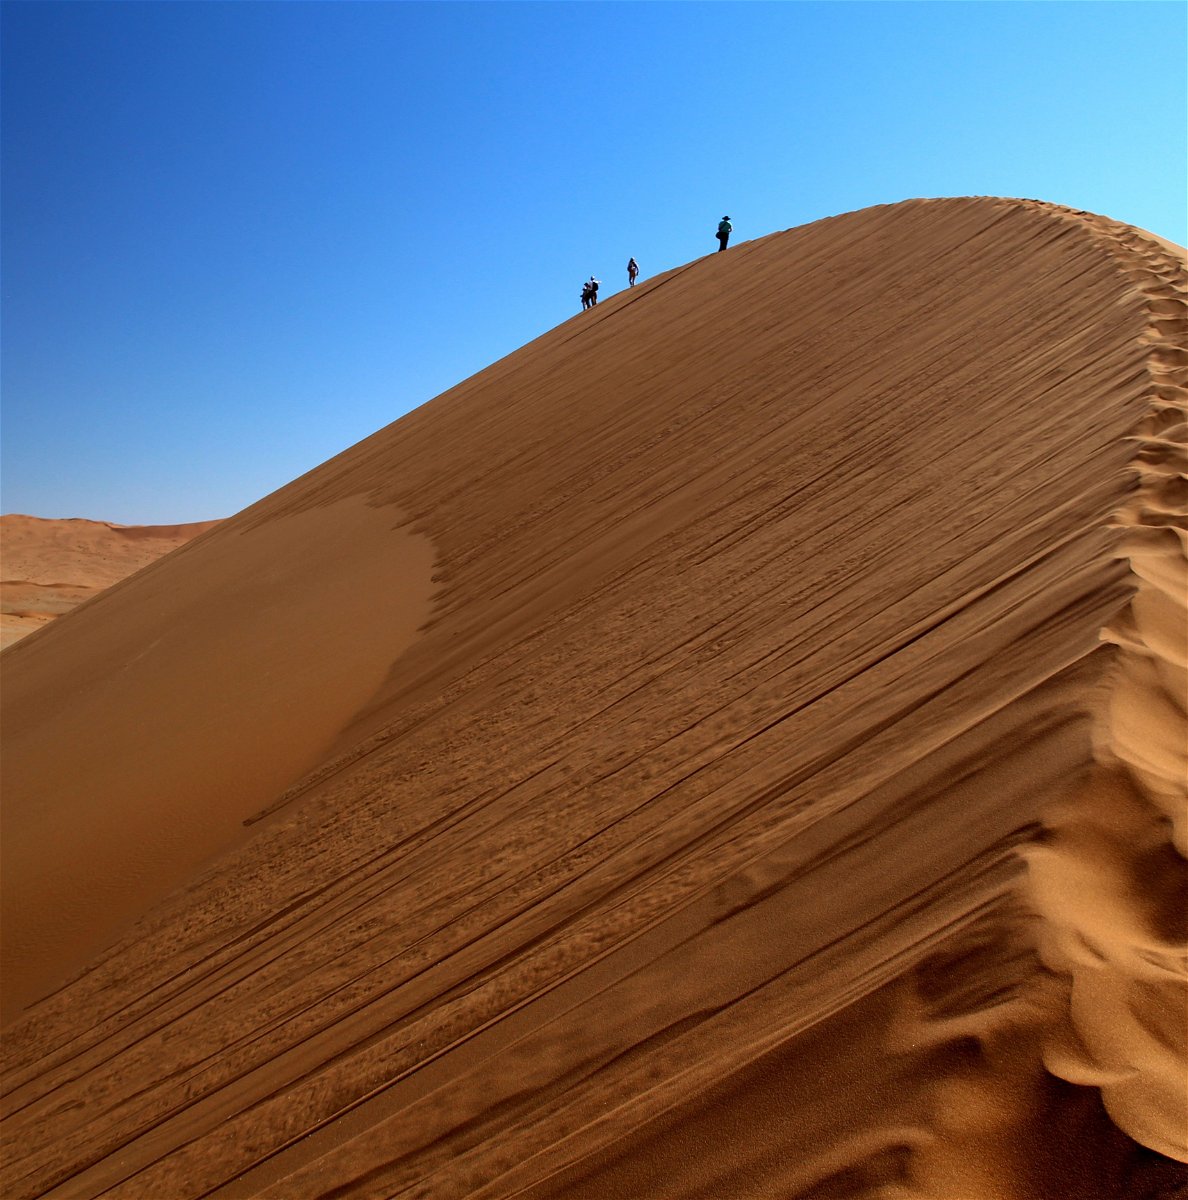  Travellers walking on top of hill in dessert.